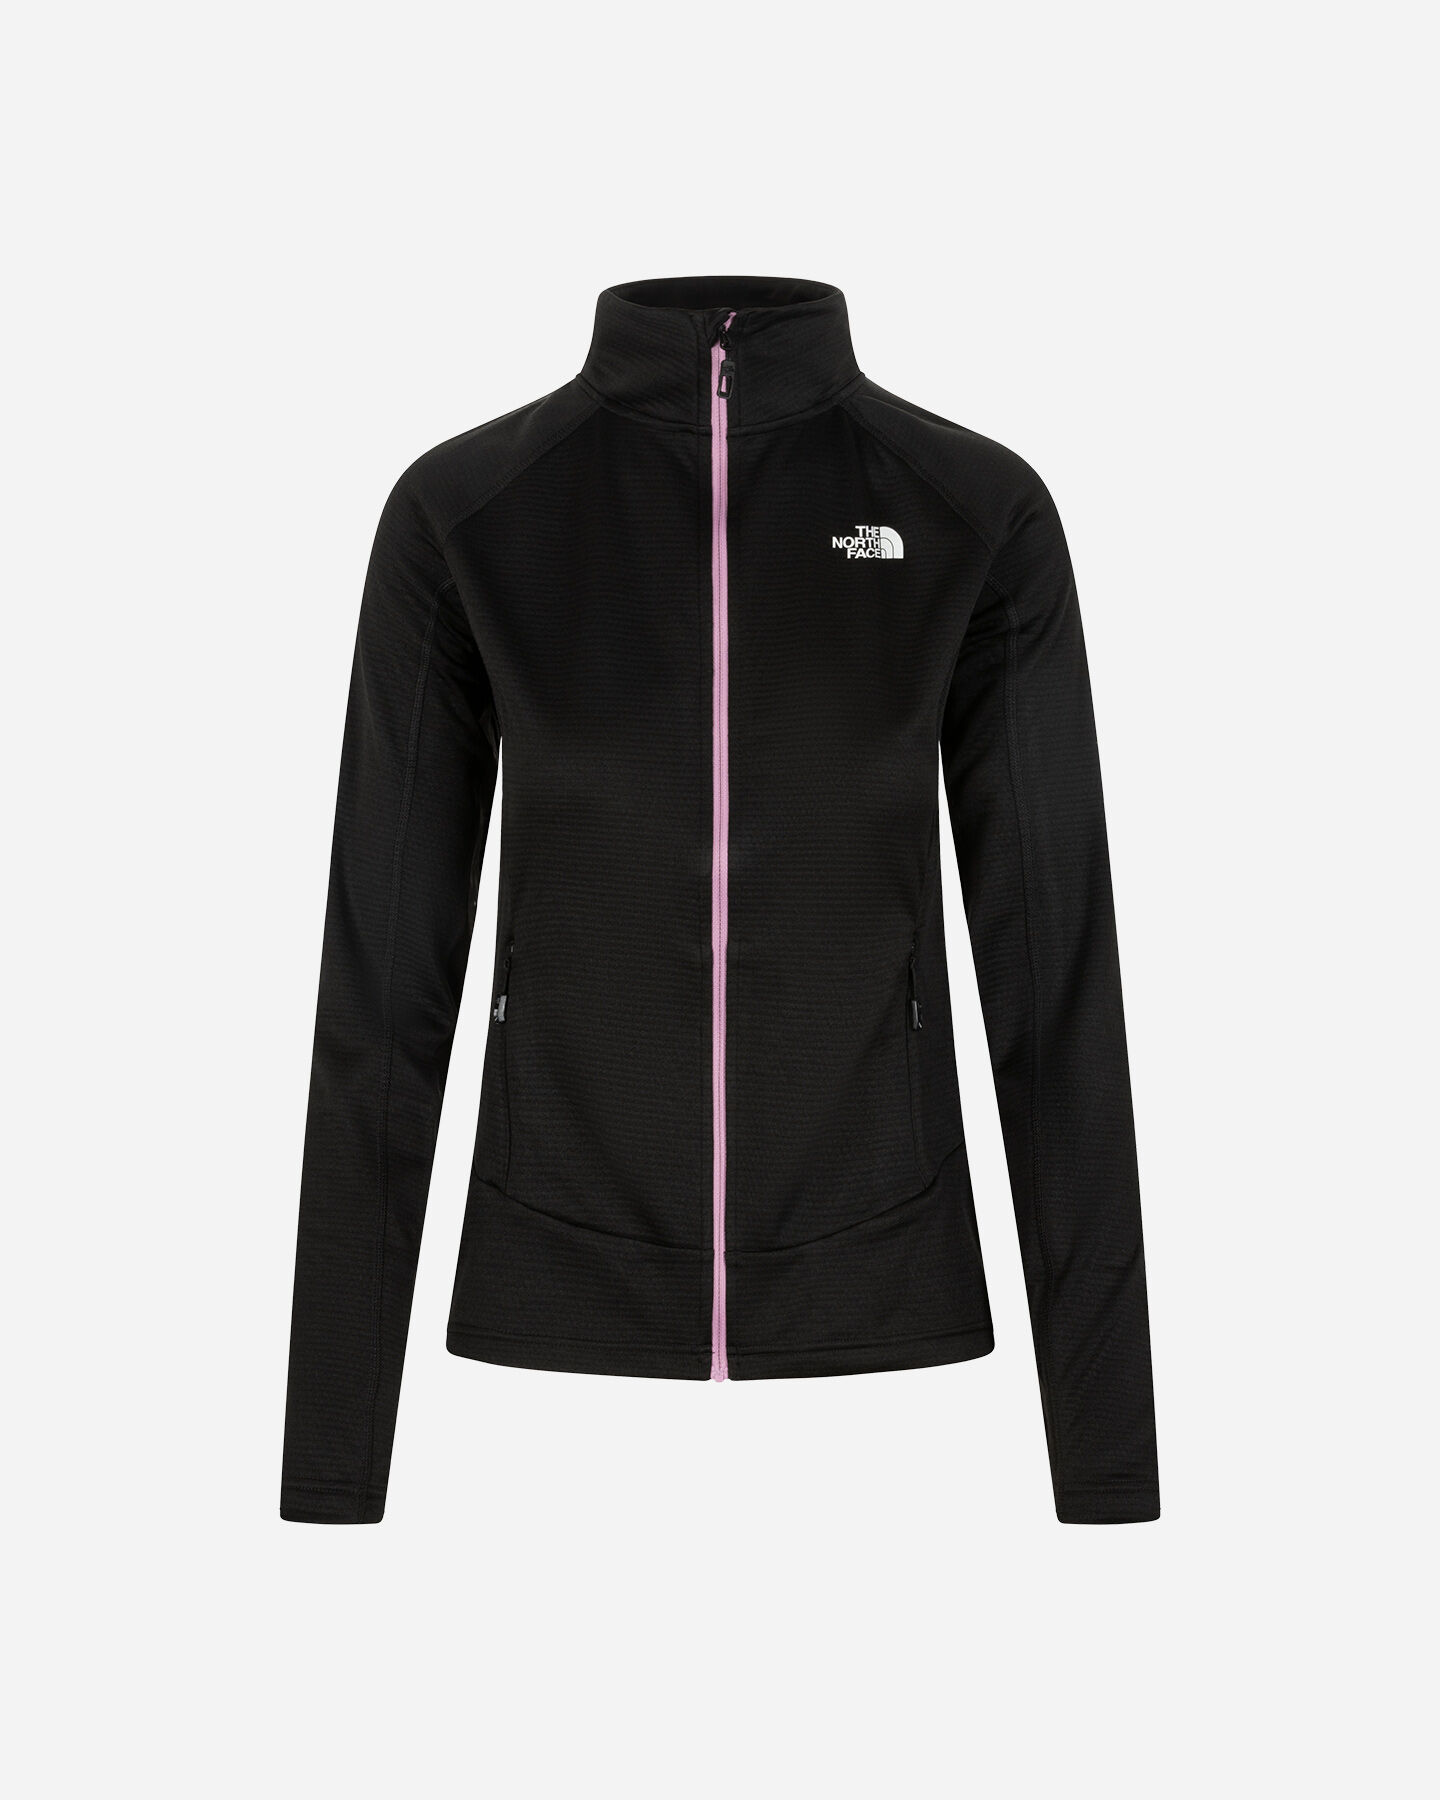  Pile THE NORTH FACE MUTTSEE W S5666504|JK3|XS scatto 0